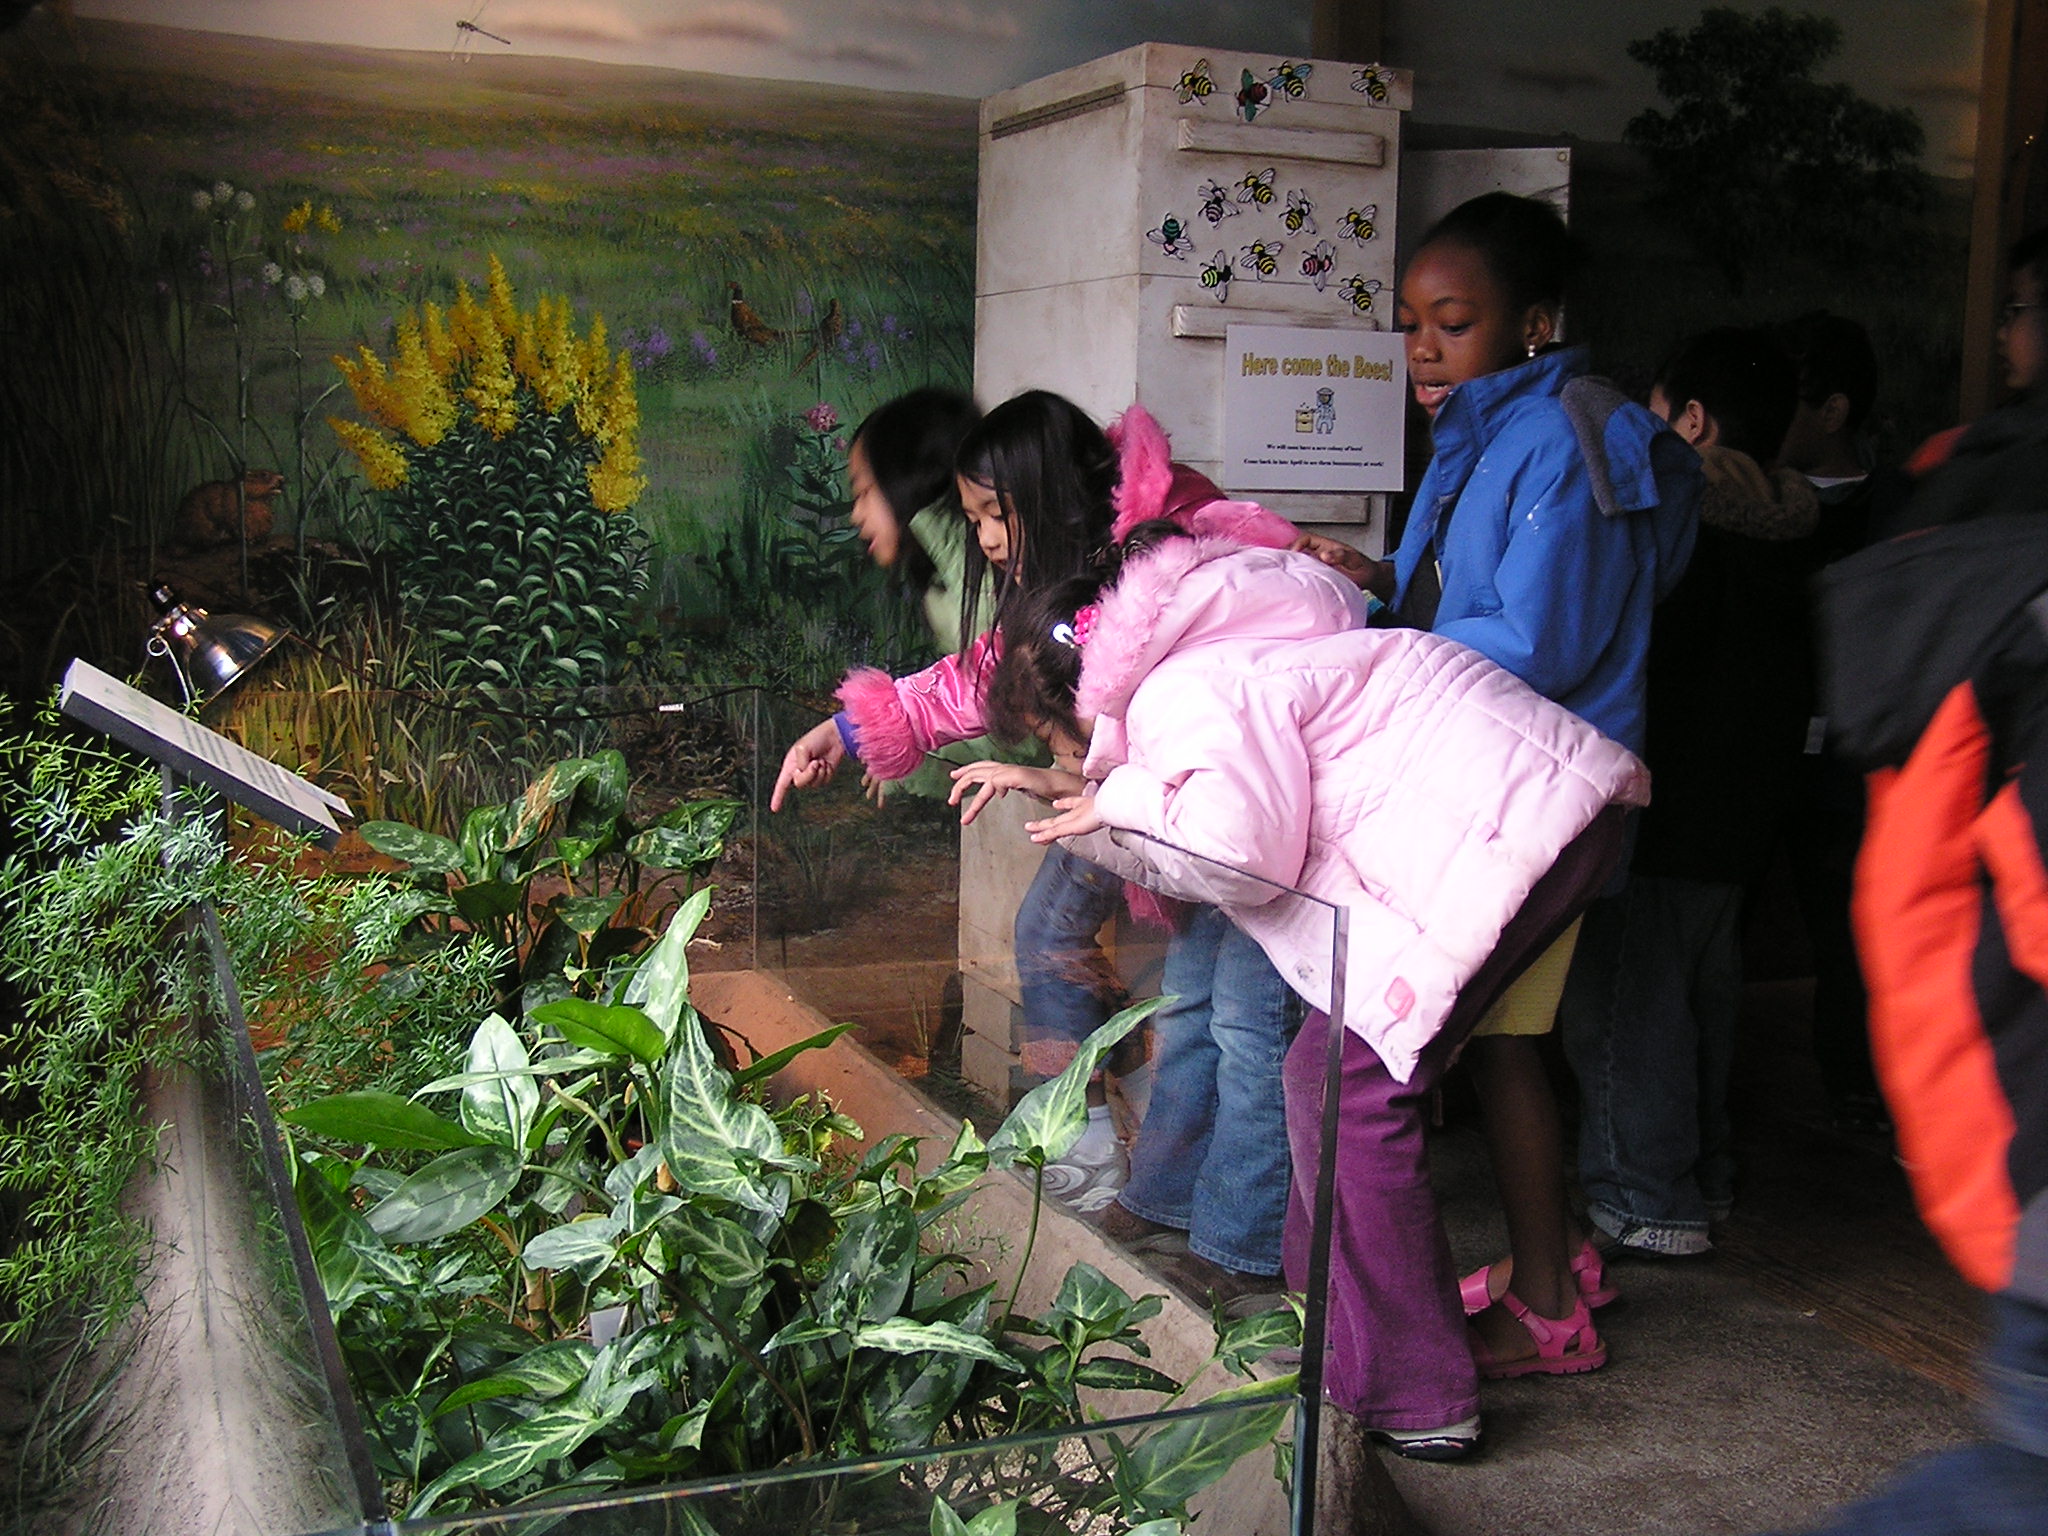 Children look at the animals at Anita Purves Nature Center.